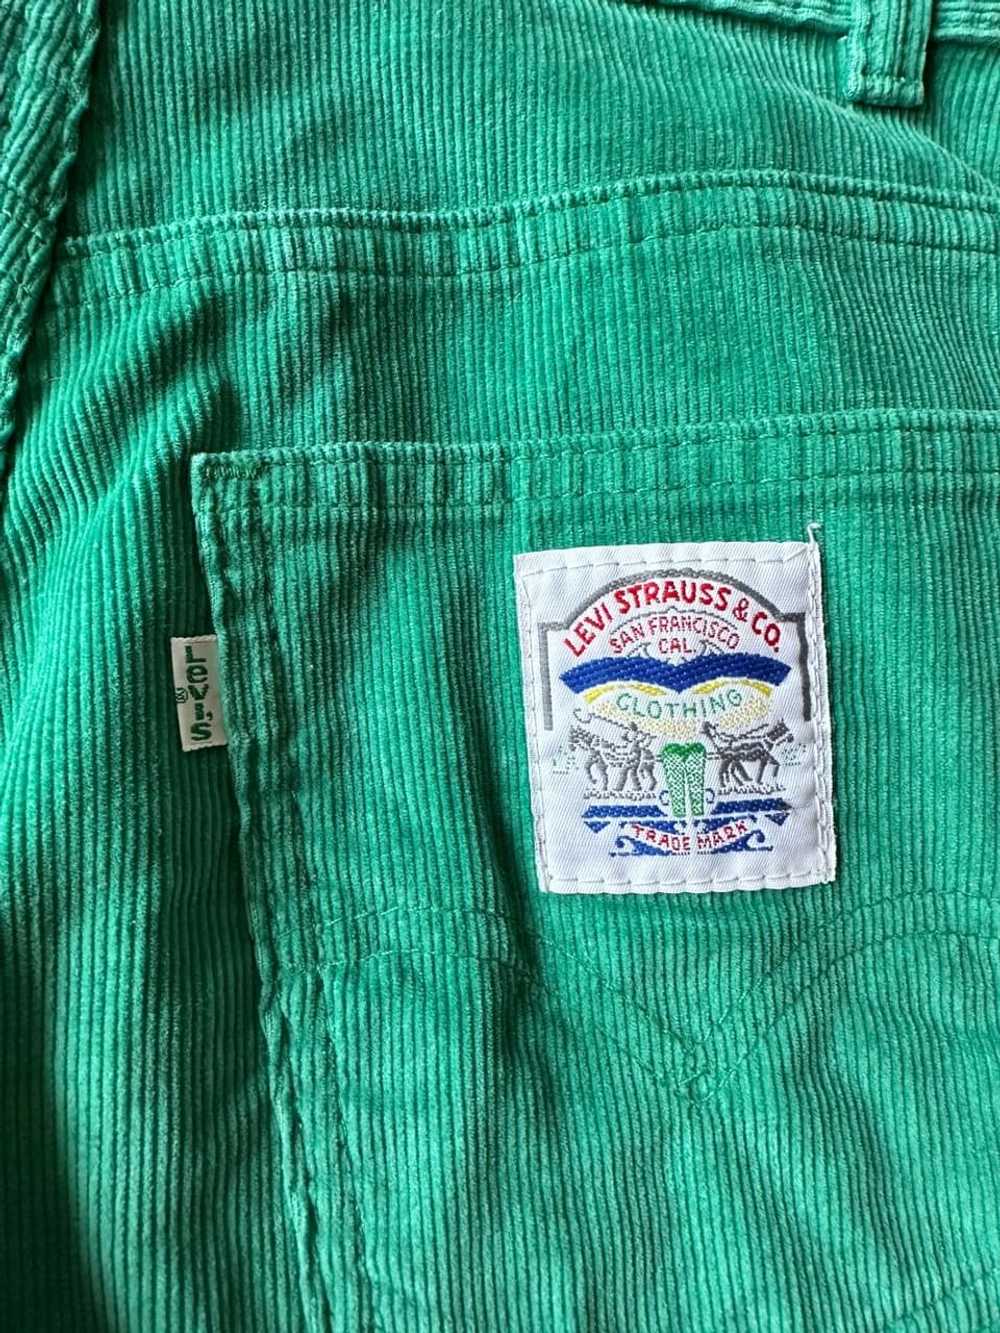 LEVI'S 80s green cords (27") - image 3